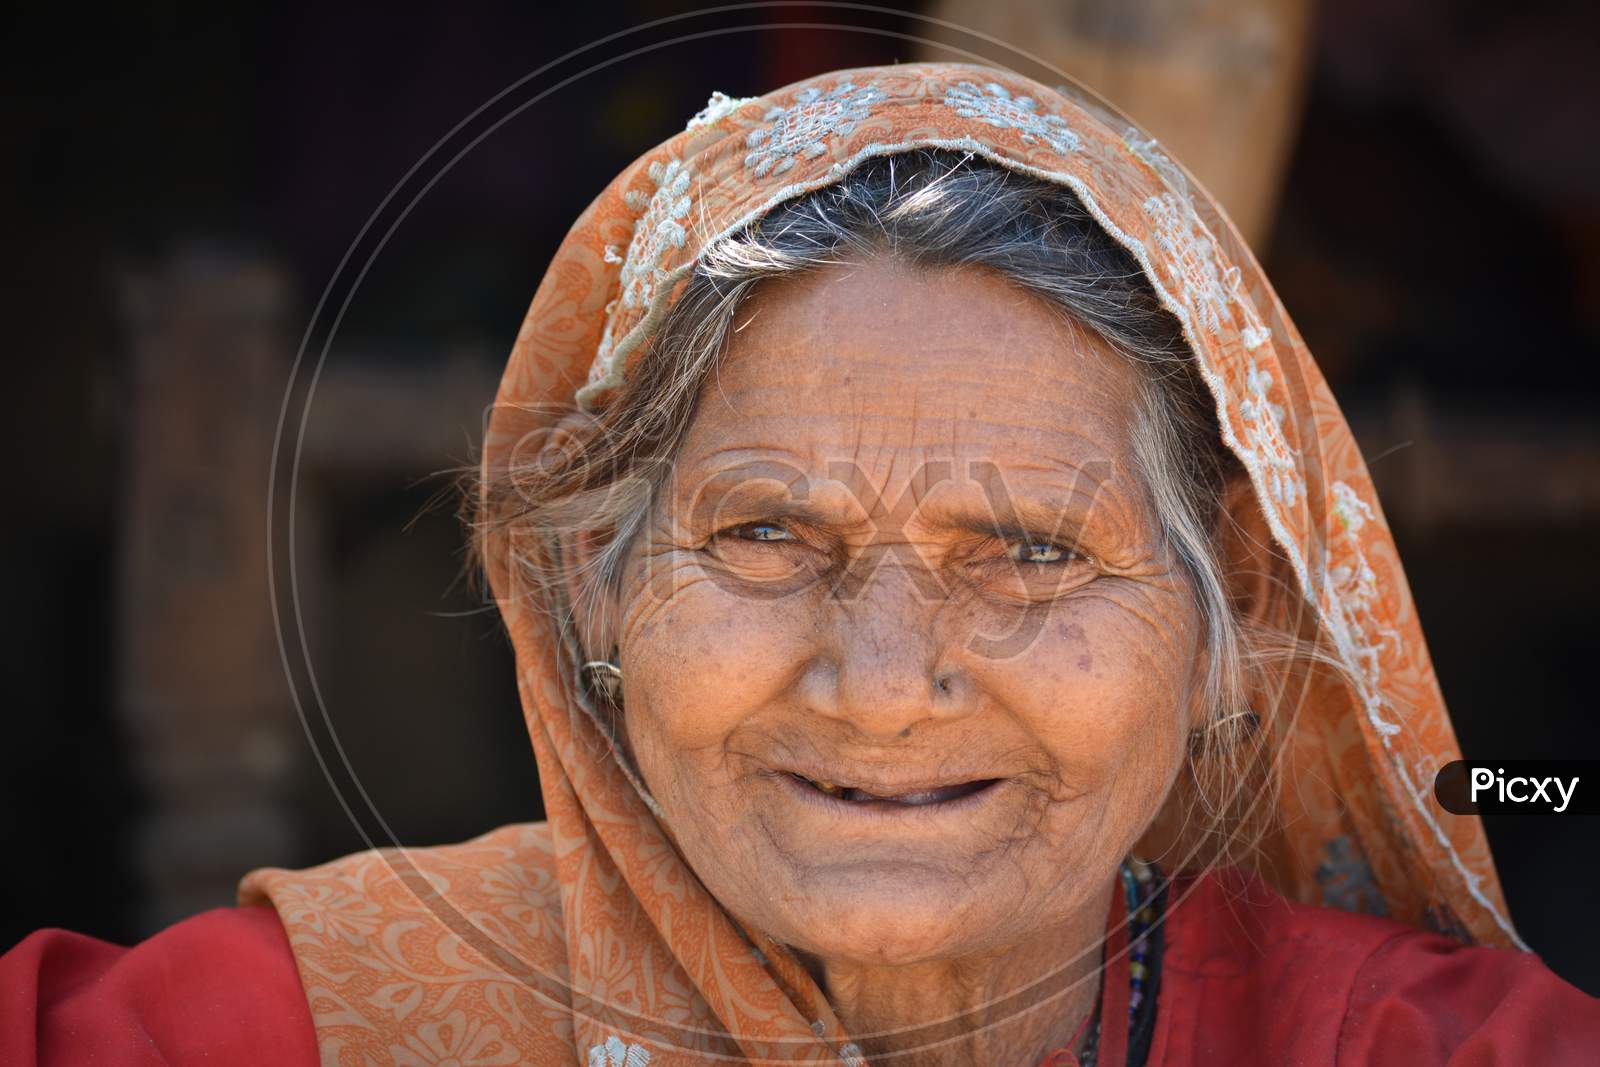 TIKAMGARH, MADHYA PRADESH, INDIA - FEBRUARY 03, 2020: Closeup portrait of an old indian woman at her village.